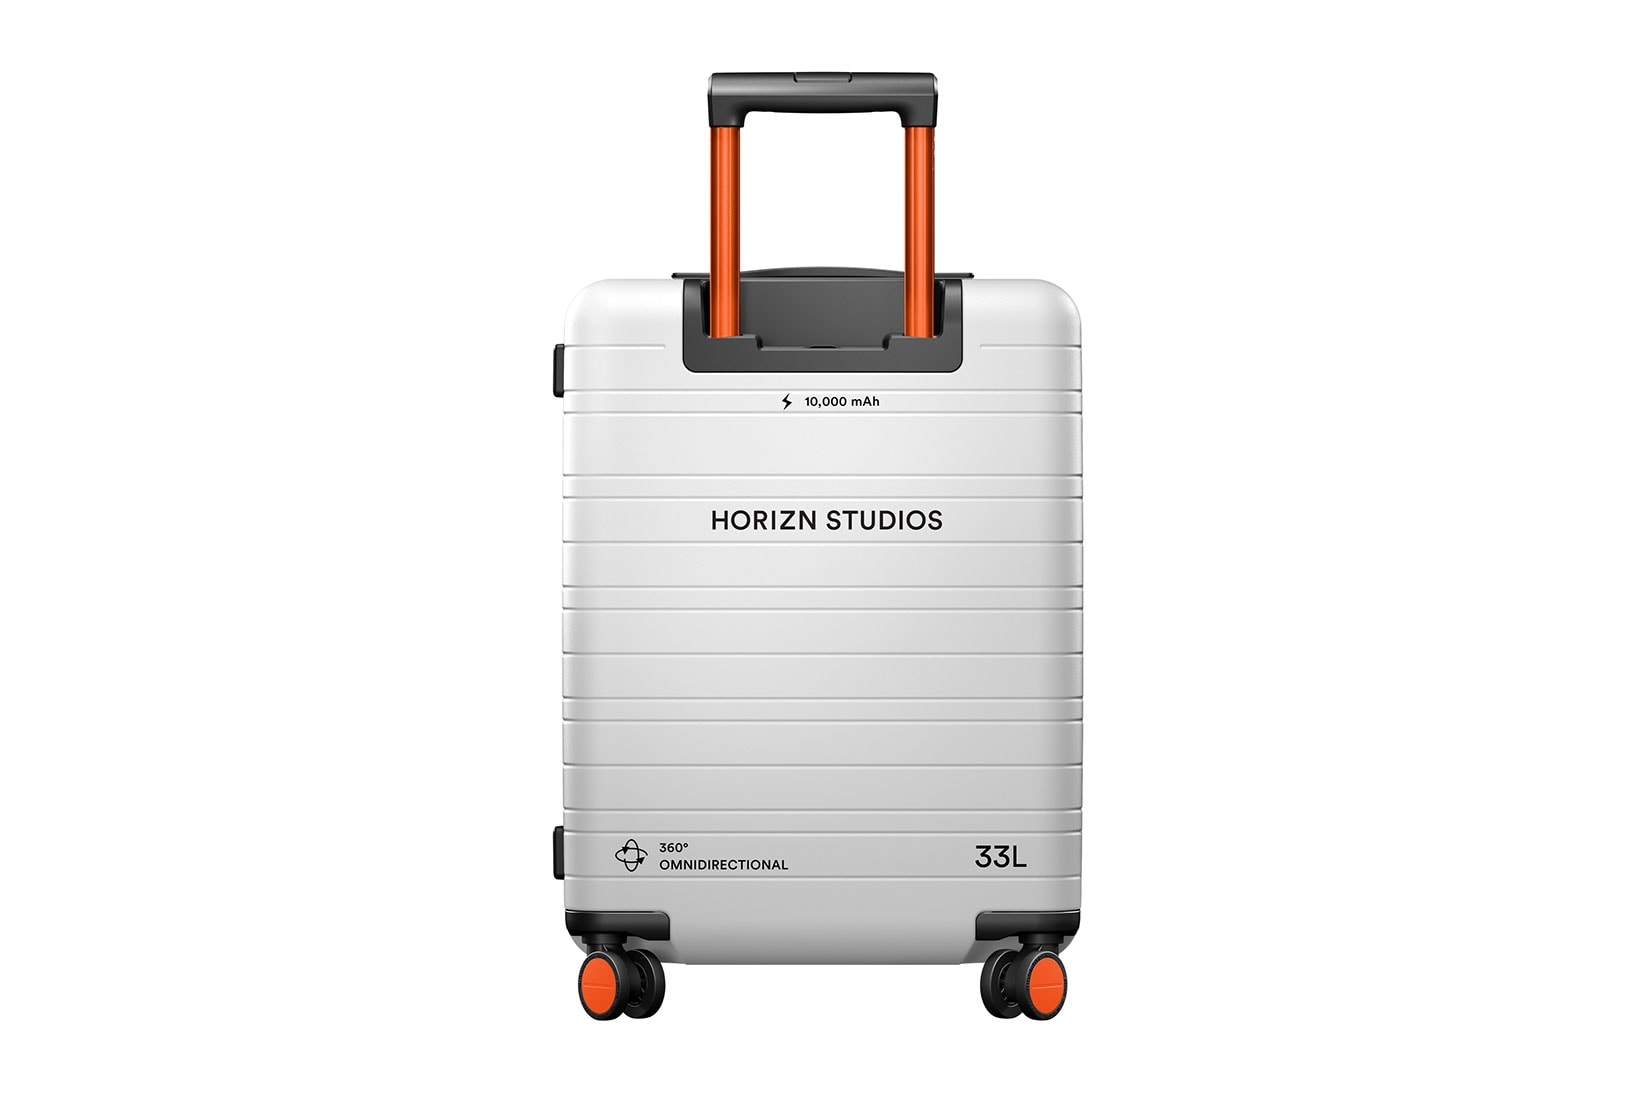 horizn studios limited edition nasa cabin luggage alyssa carson youngest astronaut space travel baggage bags suitcases 